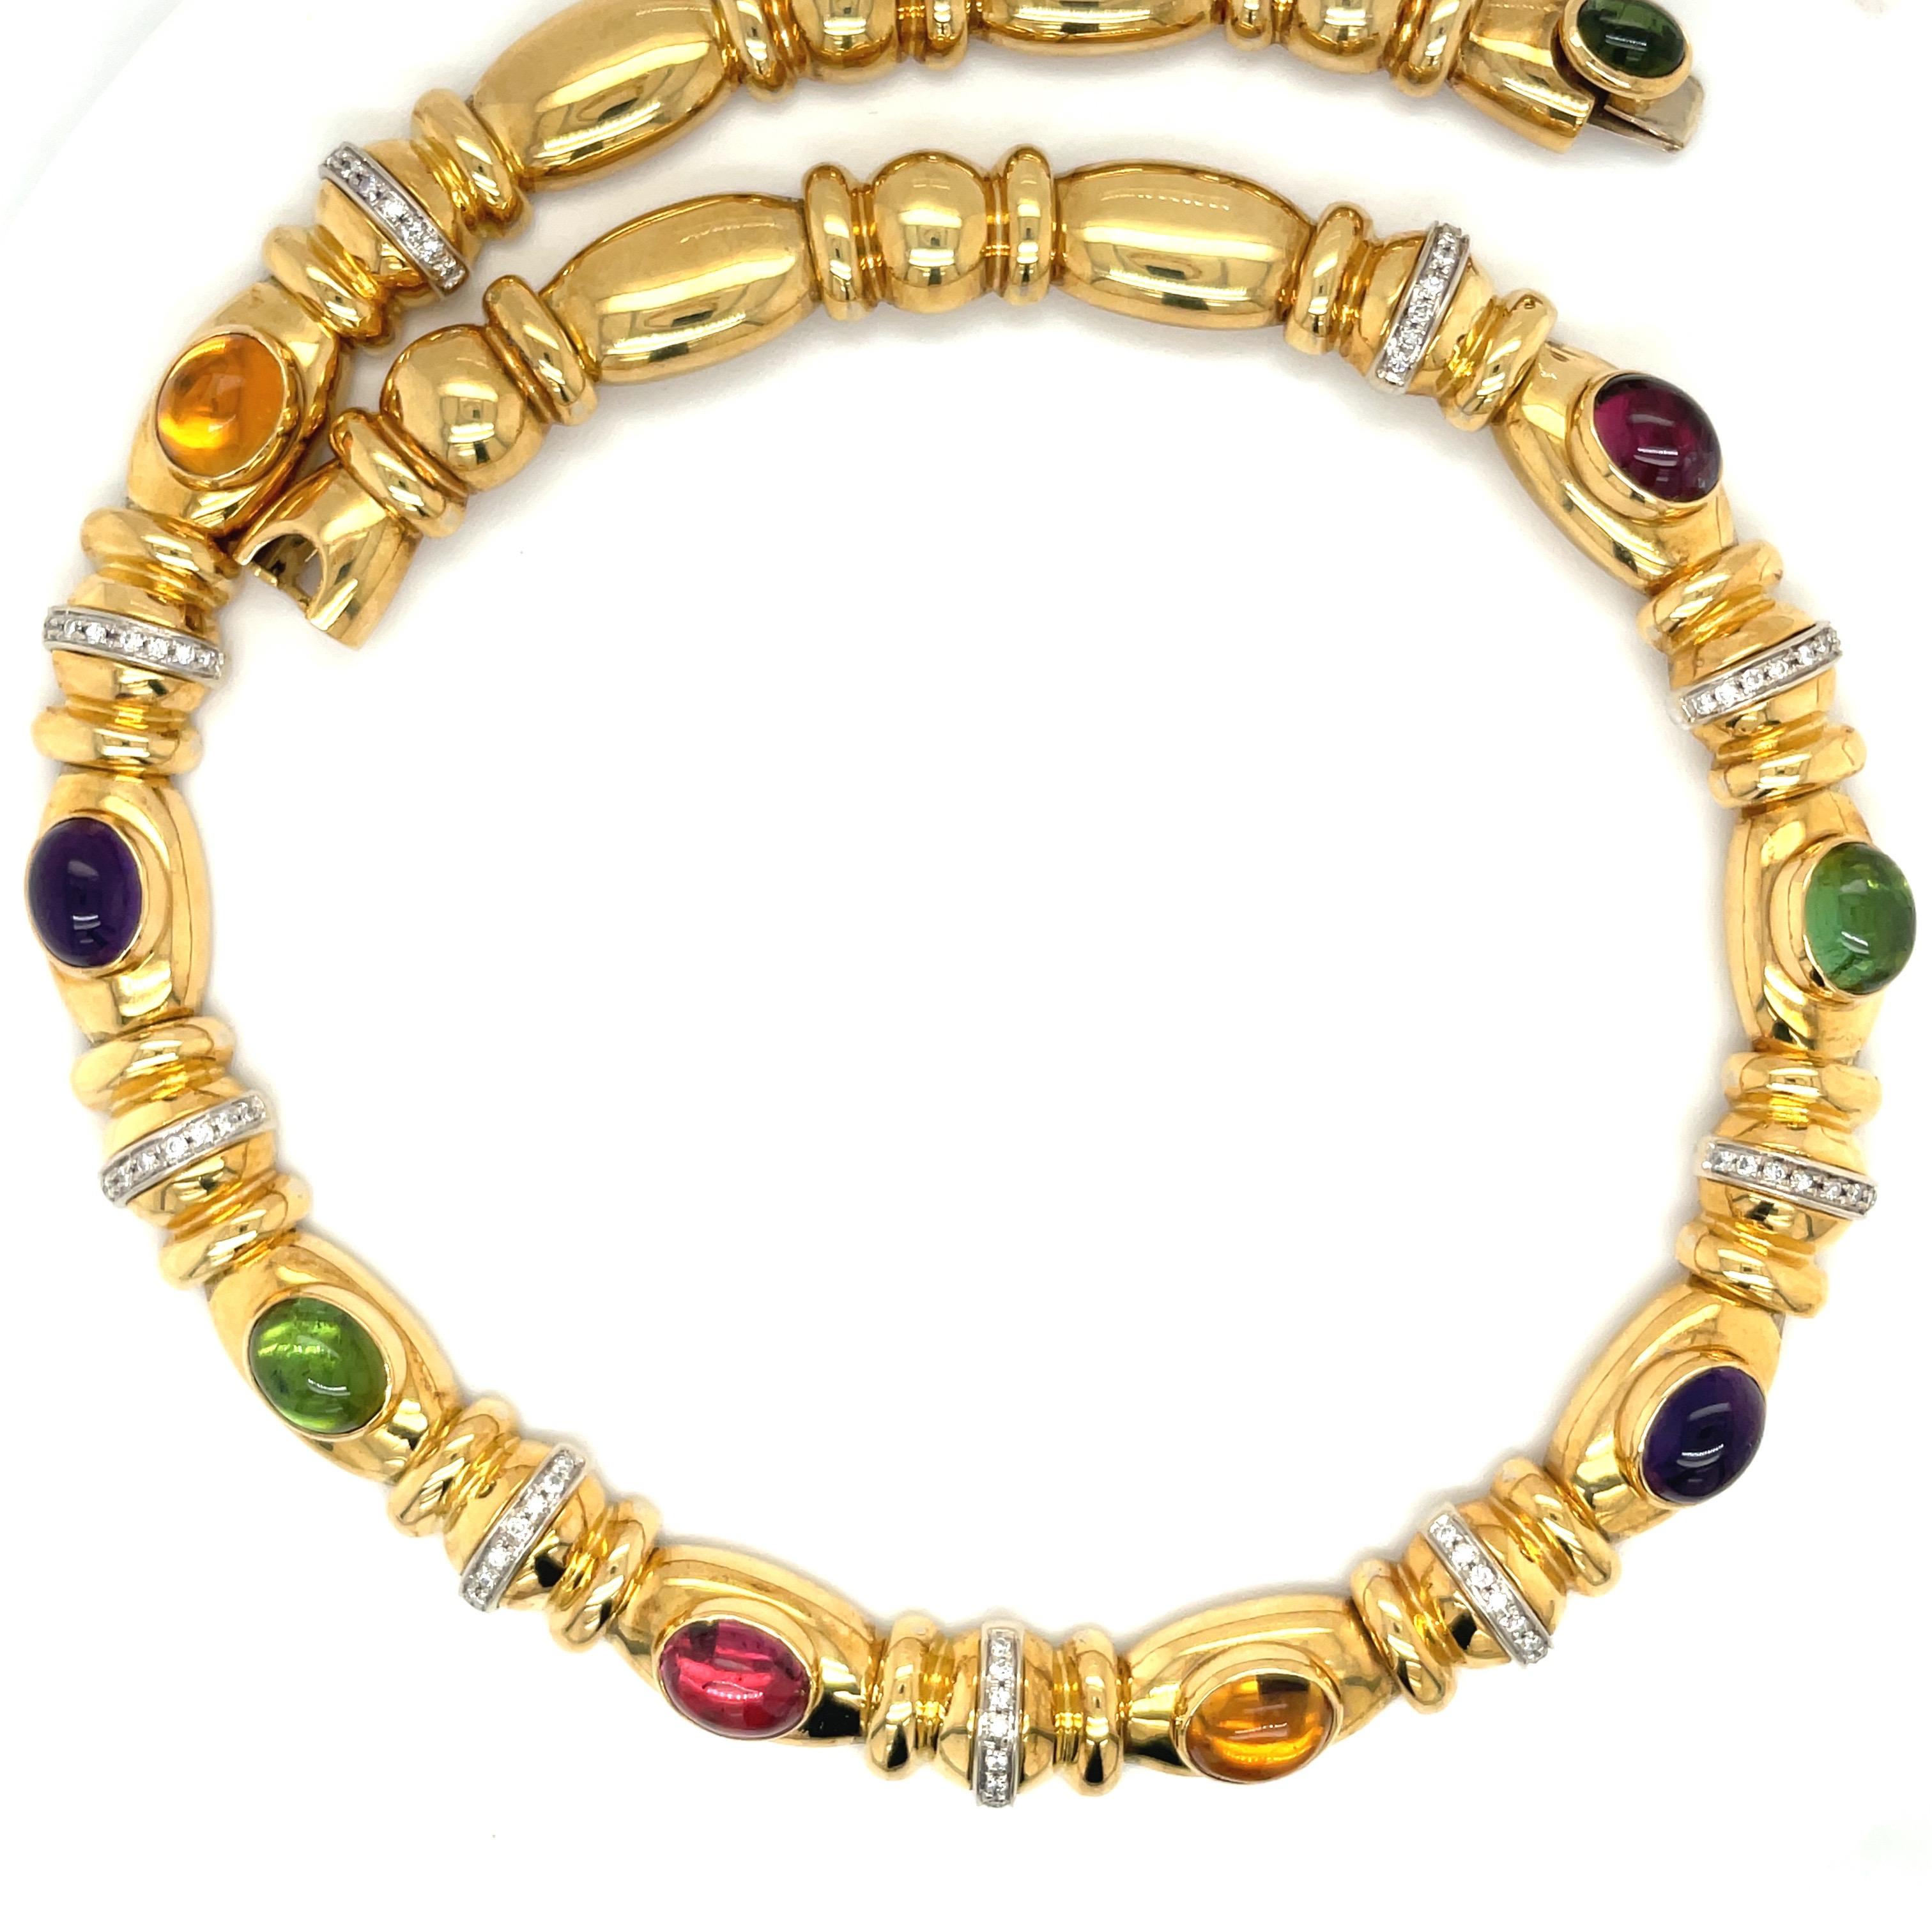 Designed by Nino Verita of Italy , this 18 karat yellow gold necklace is a true classic. The necklace is set with 8 bezel set cabochon semi precious stones of citrine, amethyst, pink & green tourmaline. Eight white gold diamond 0.90 carat rondelles